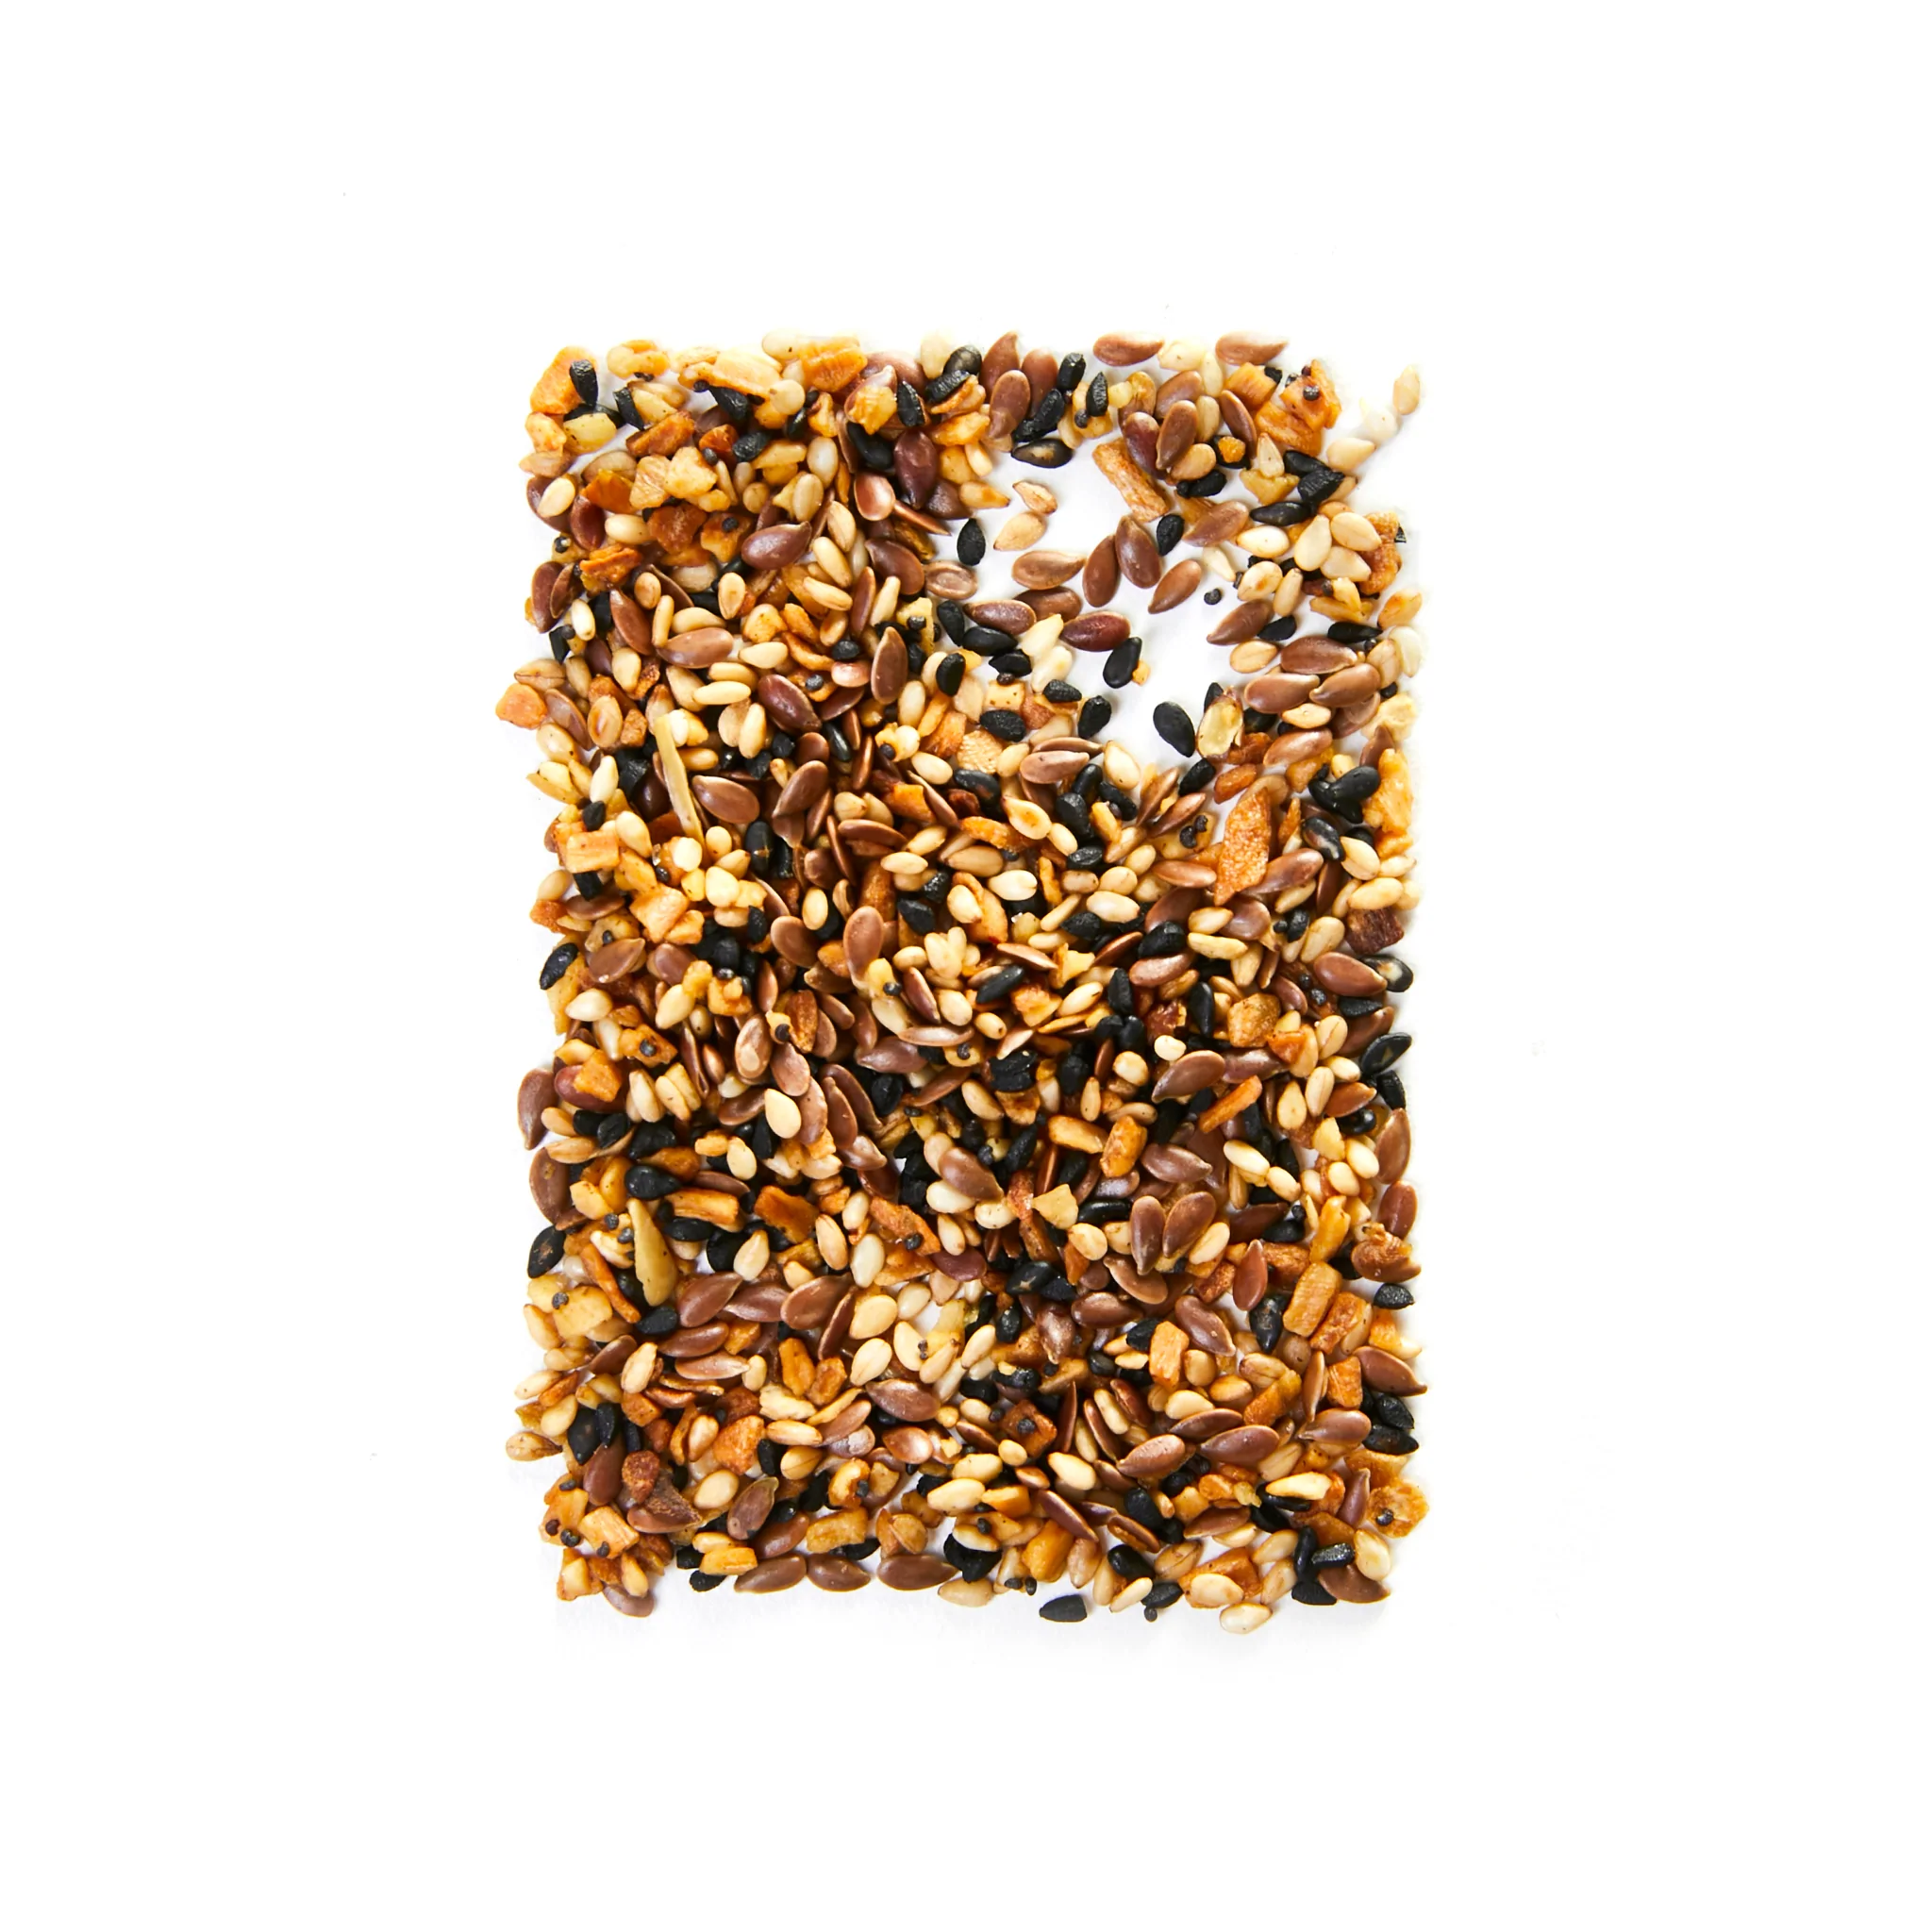 piles of montreal bagel spice shaped into a rectangle on a white background